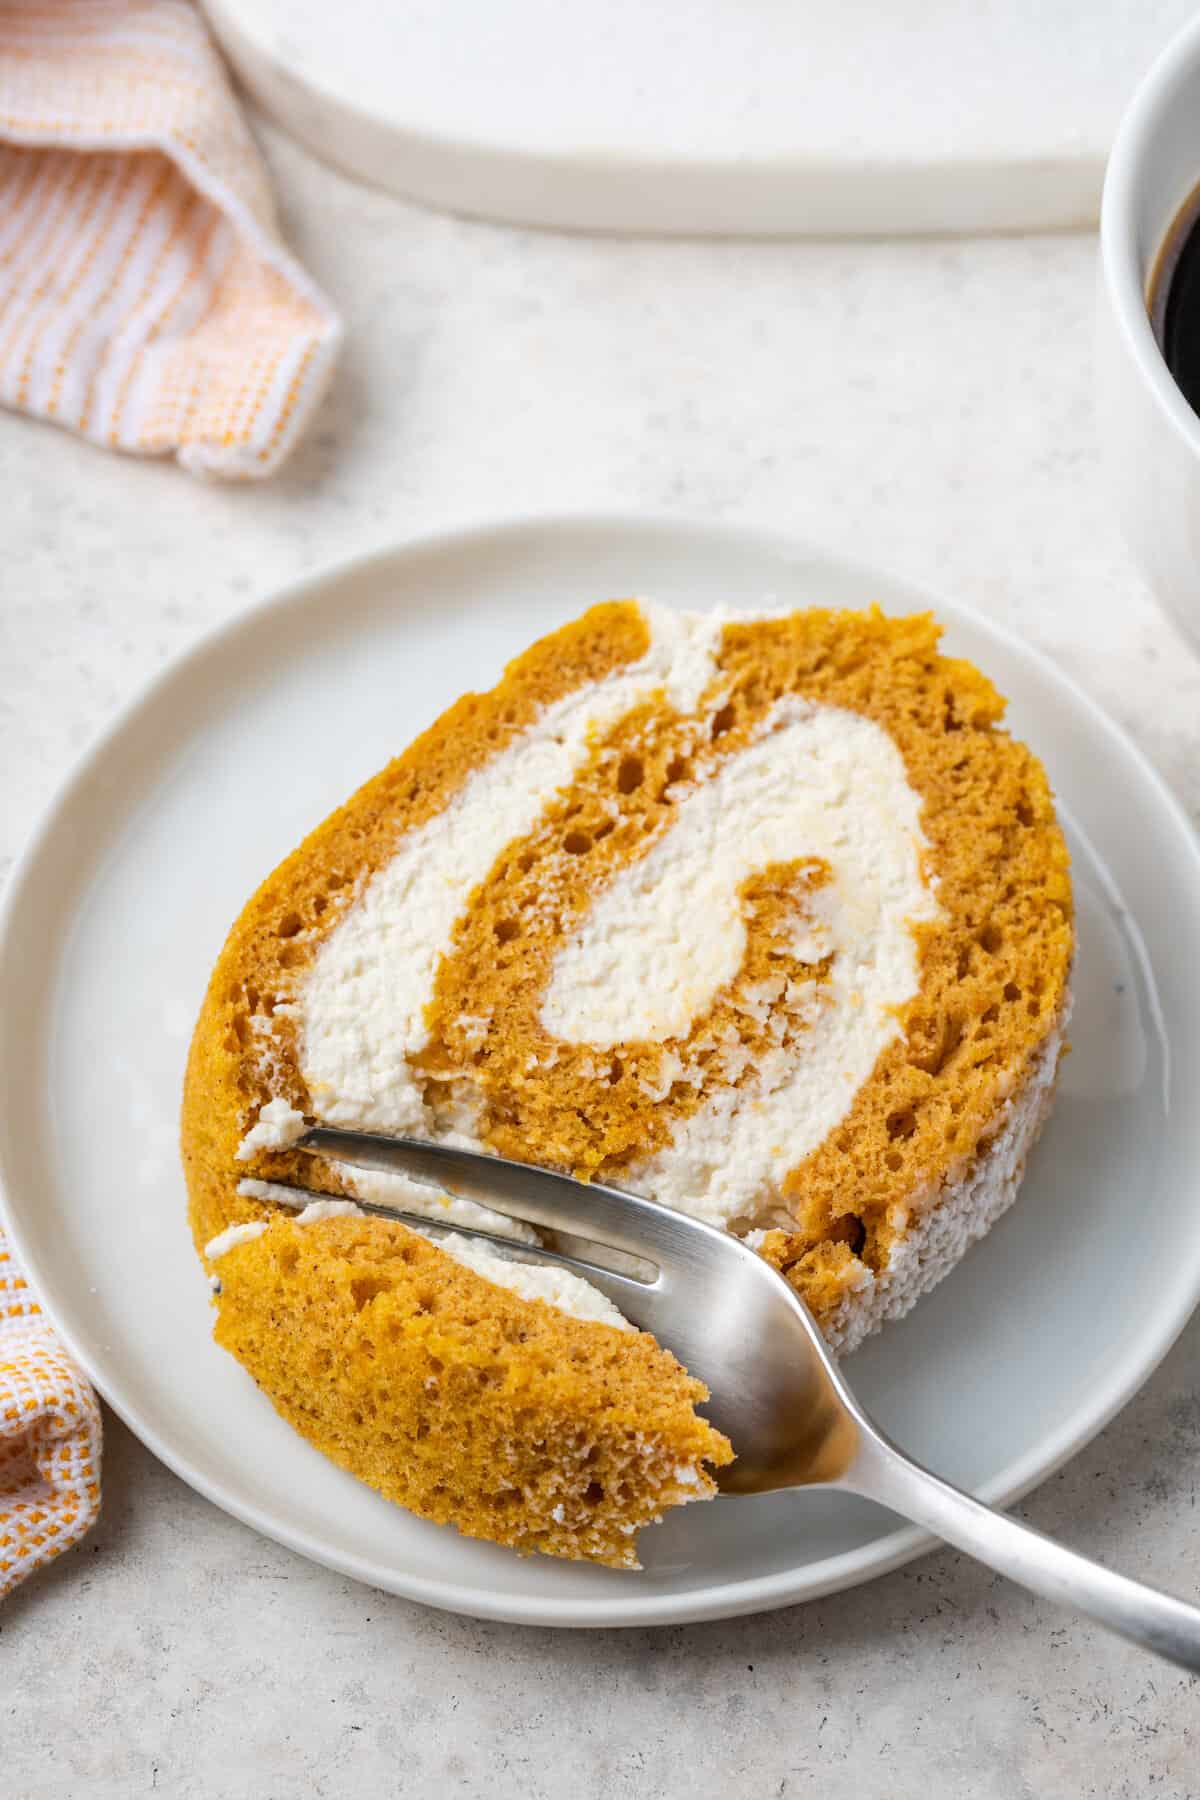 A fork cuts into a slice of glute free pumpkin roll on a white plate.